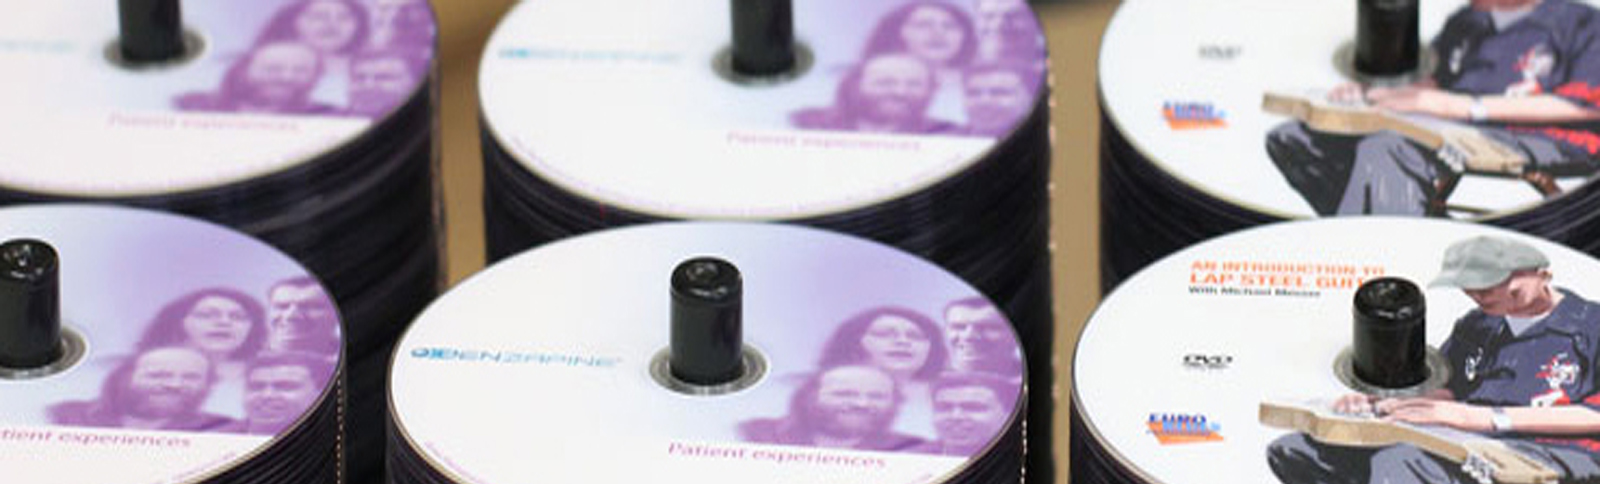 CD Printing or Branded CDs Oxfordshire UK